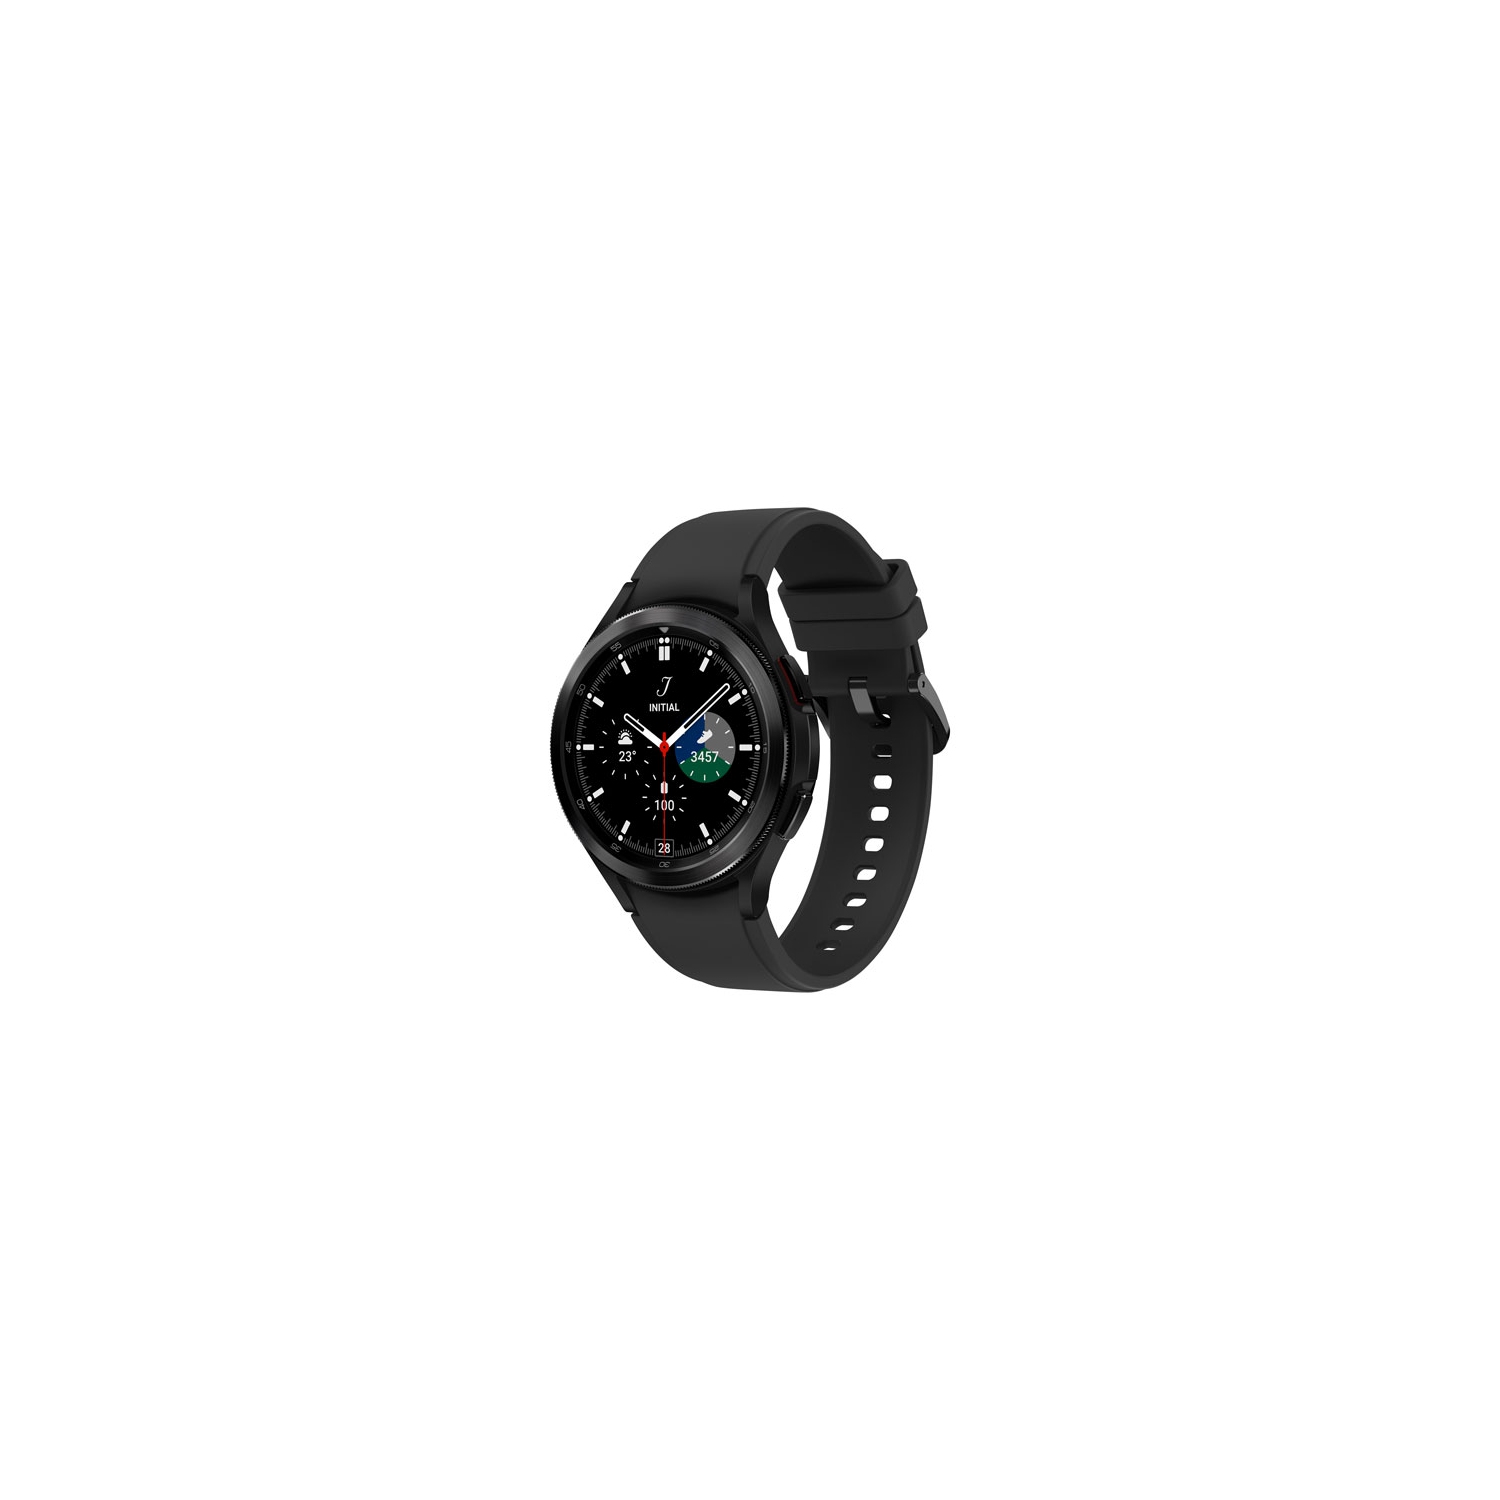 Refurbished (Excellent) - Samsung Galaxy Watch4 Classic 46mm Smartwatch w/ Heart Rate Monitor - Black